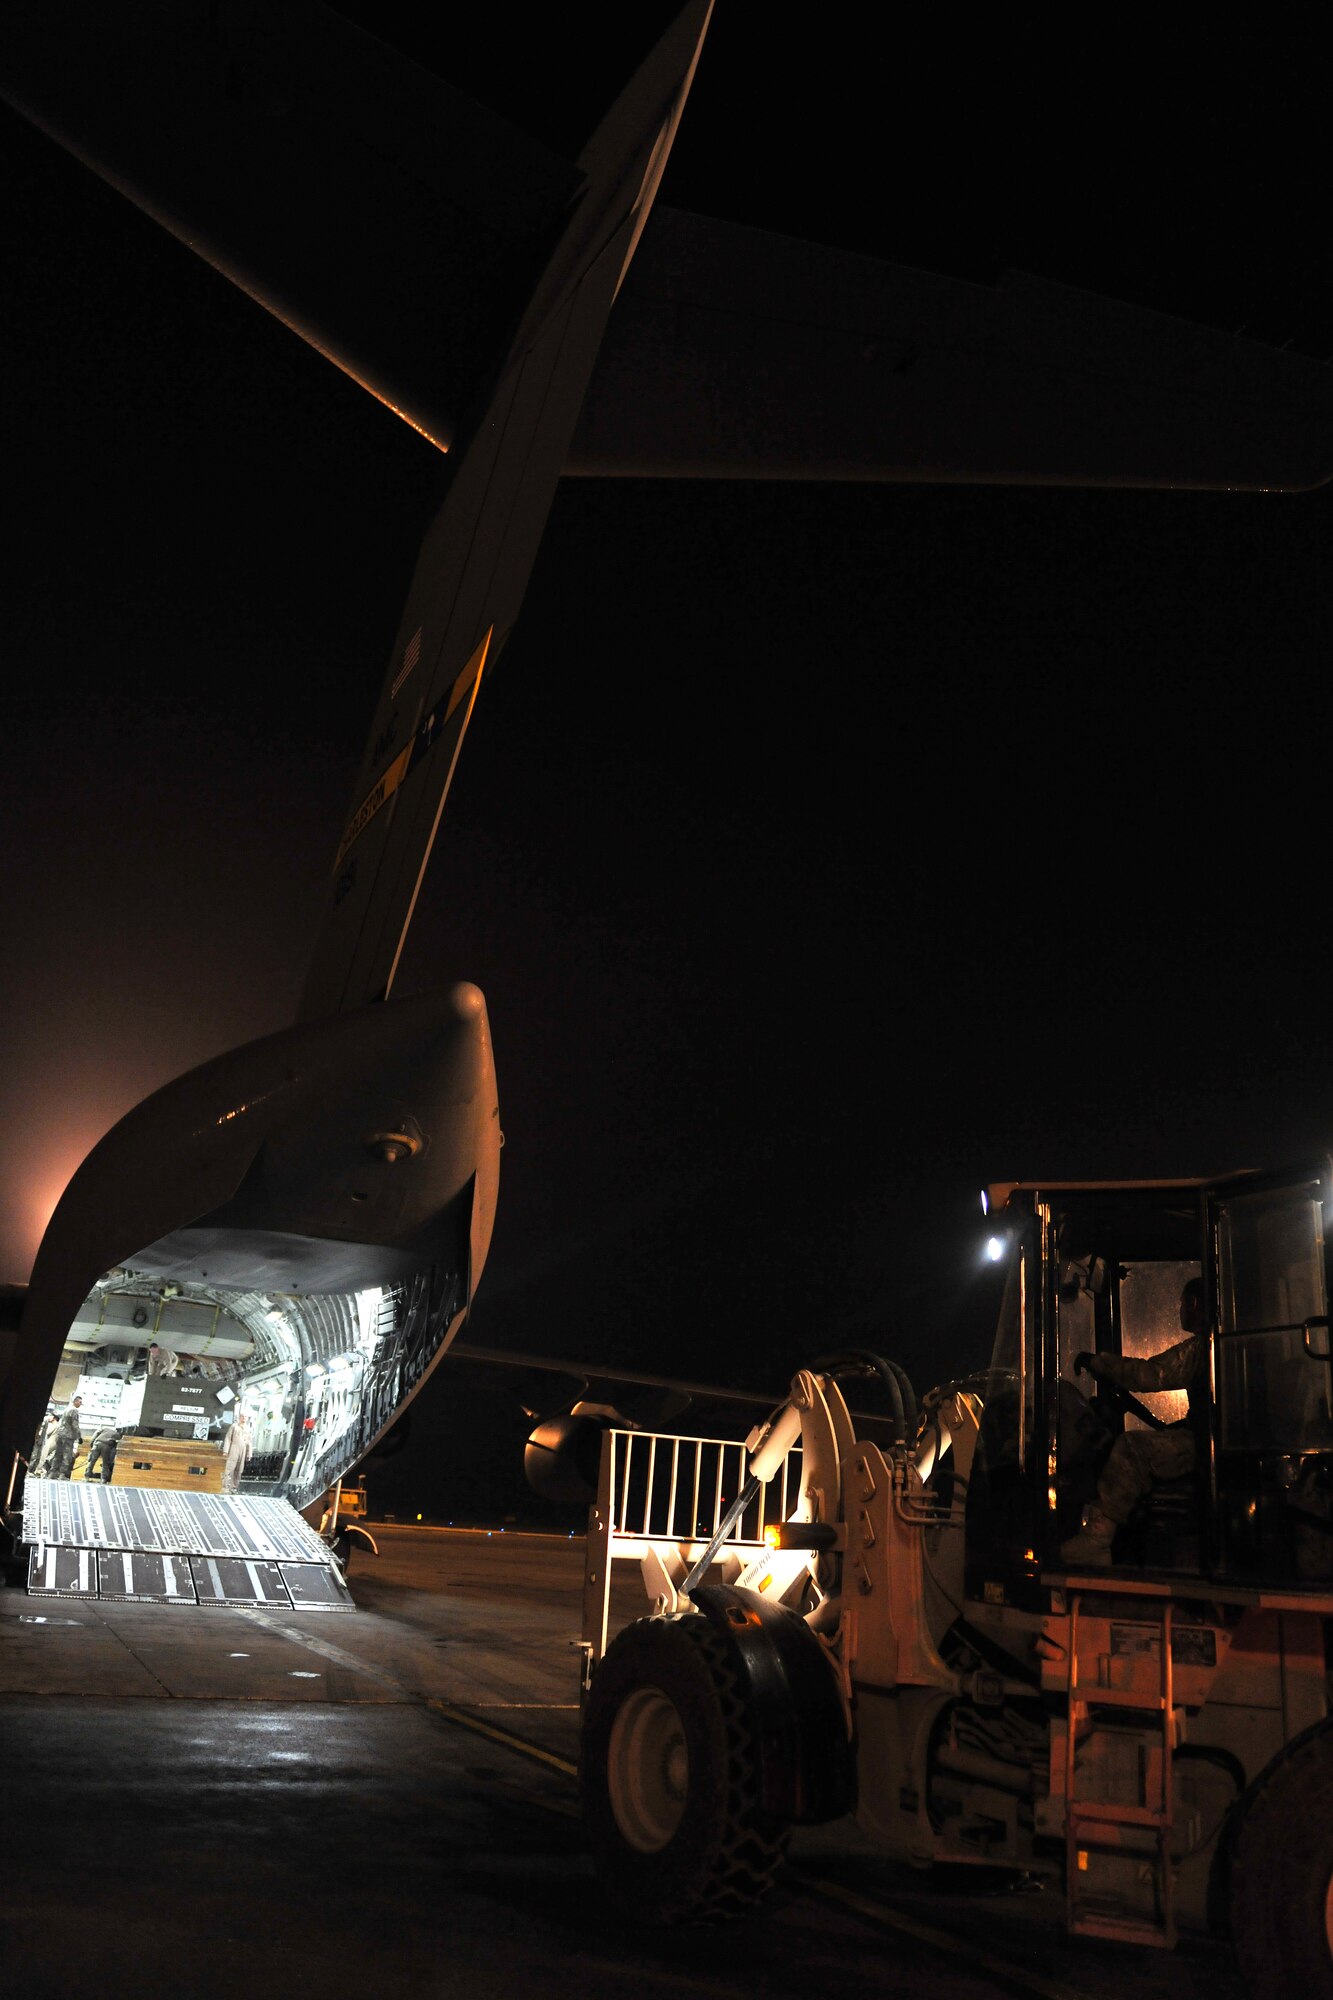 Airmen from 455th Expeditionary Aerial Port Squadron, Detachment 3, load pallets onto a C-17 Globemaster III at Camp Marmal, Afghanistan, Jan 30, 2013. Airmen belonging to the 455th EAPS are charged with unloading and loading every aircraft carrying supplies or personnel into and out of Camp Marmal supporting the International Security Assistance Force Regional Command-North’s transportation mission. (U.S. Air Force photo/Senior Airman Chris Willis)